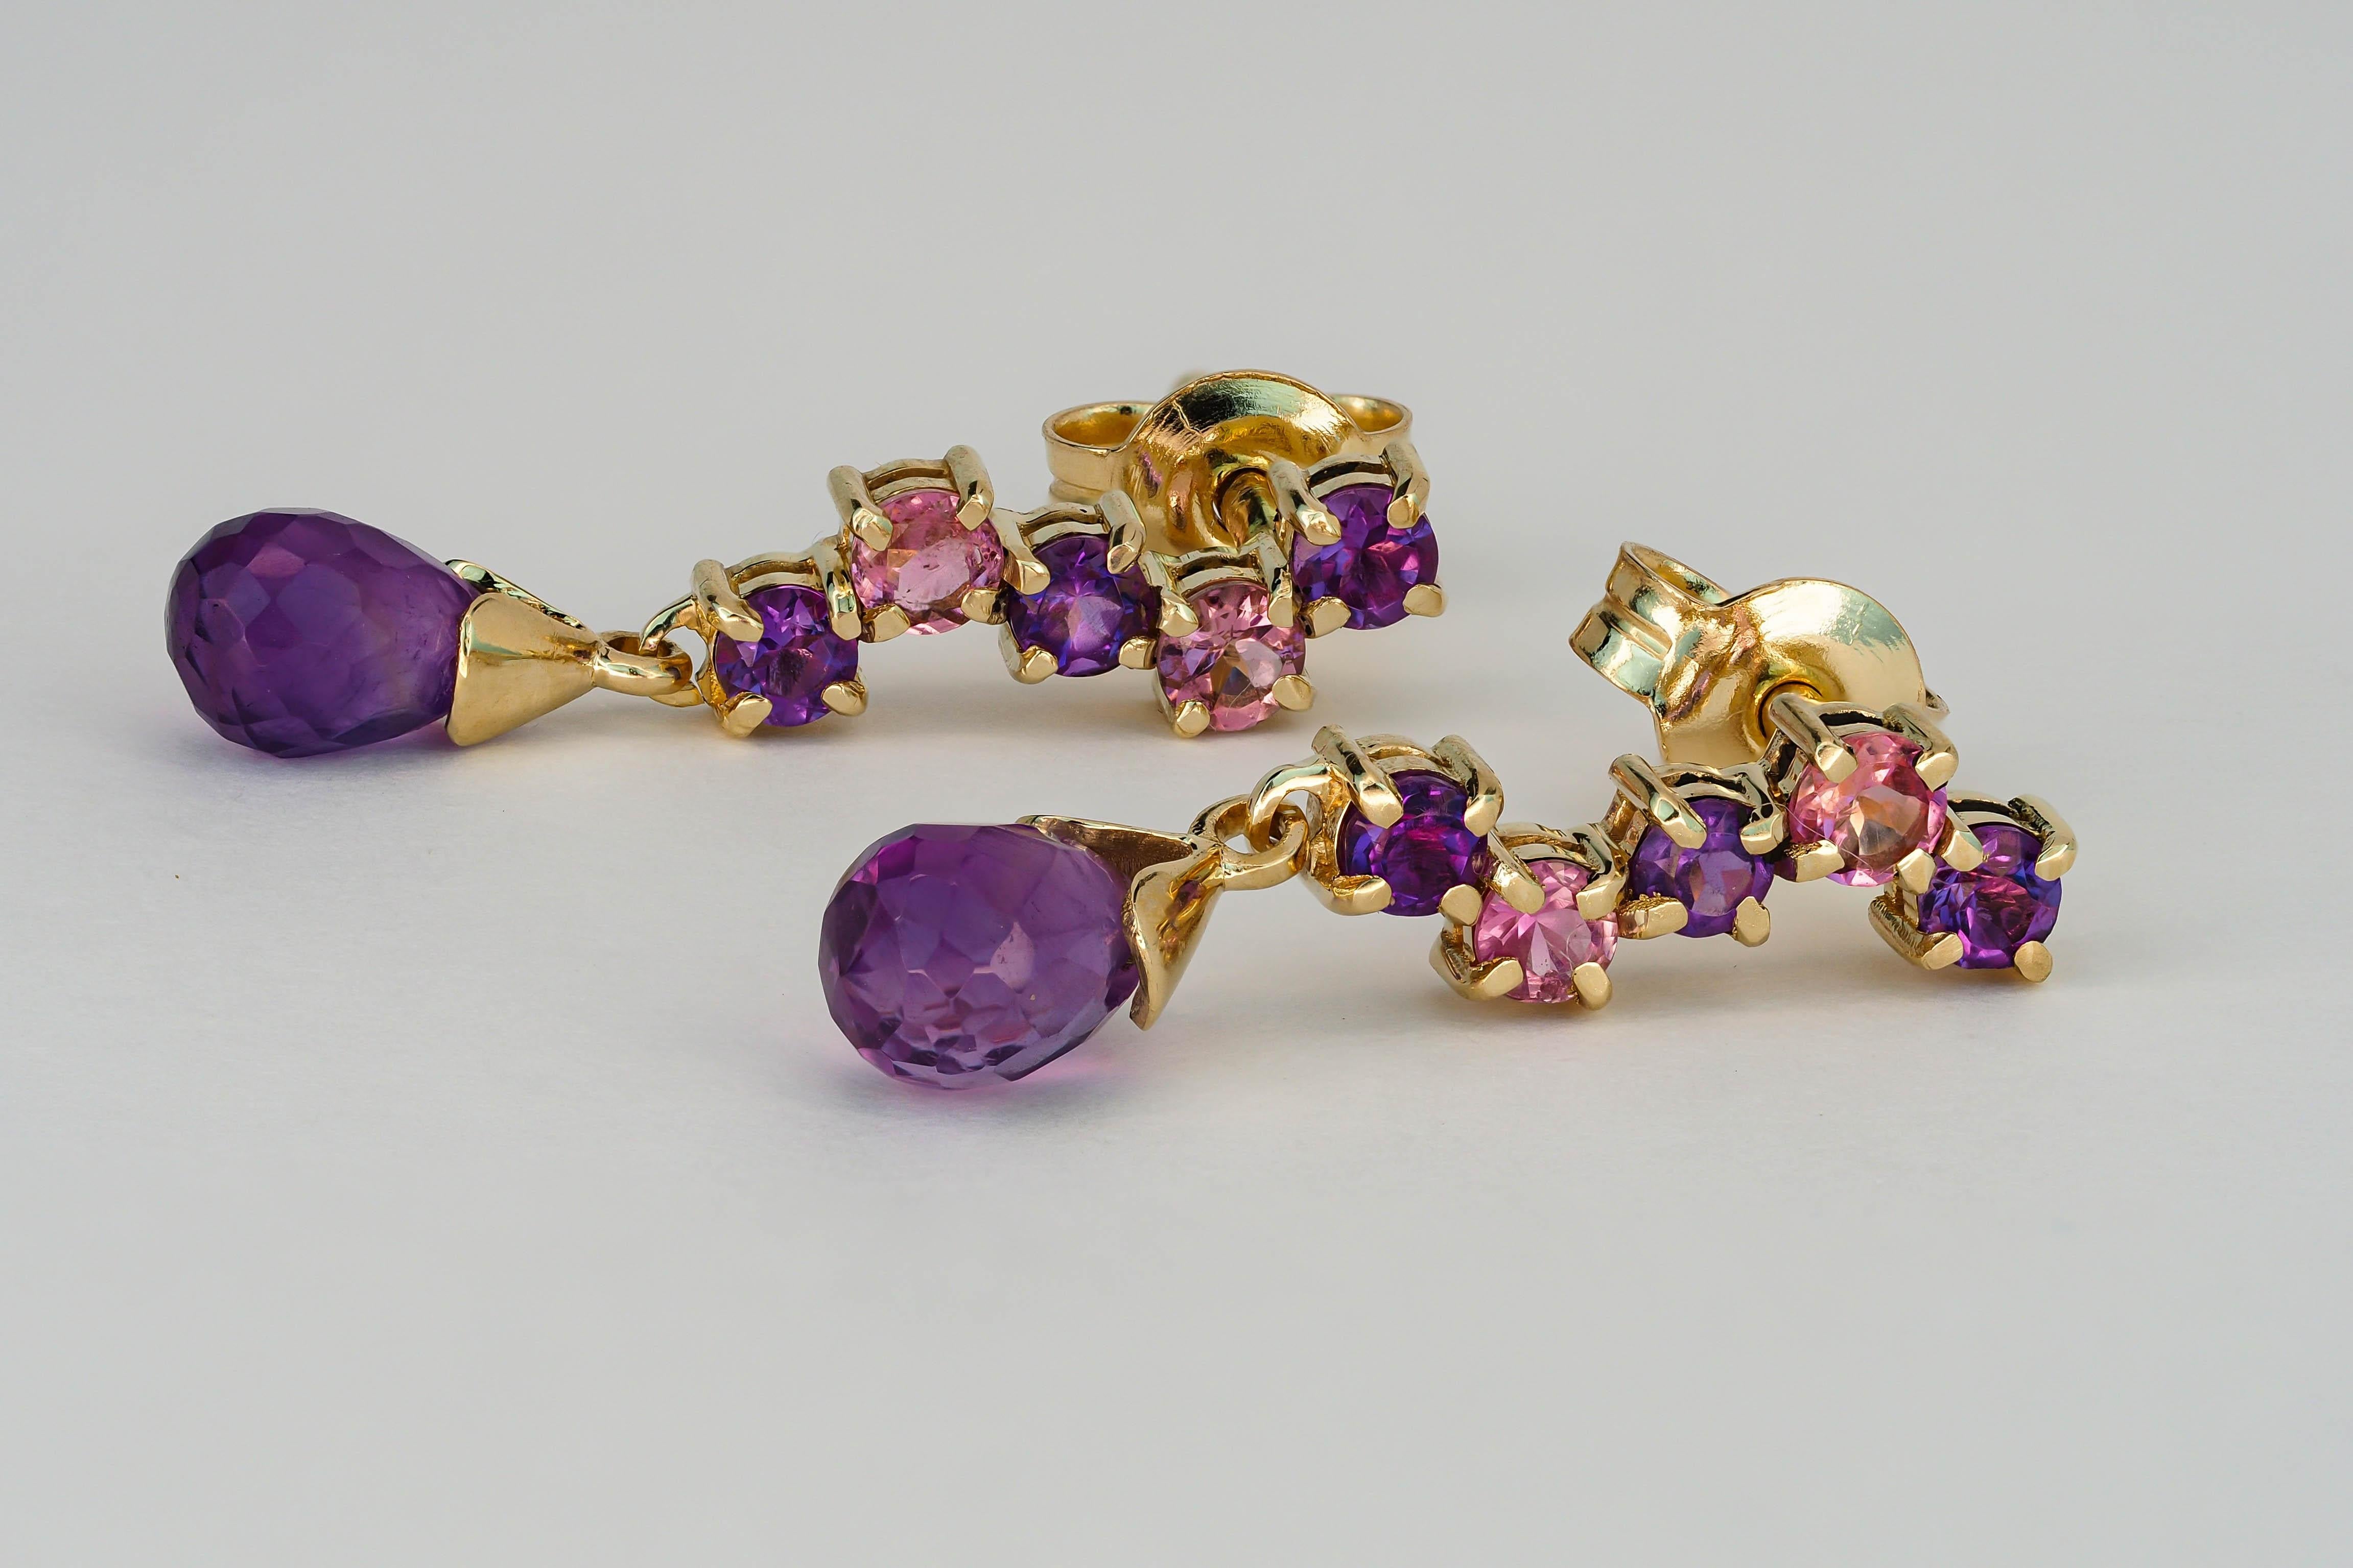 14 kt solid gold earrings studs with natural amethysts and sapphires. February birthstone.
Metal: 14kt solid gold
Earrings size: 22 x 5 mm.
Weight: 2.2 g.

Central stones: Natural amethysts - 2 pieces 
Cut: Briolettes
Weight: approx 2.00 ct total. 